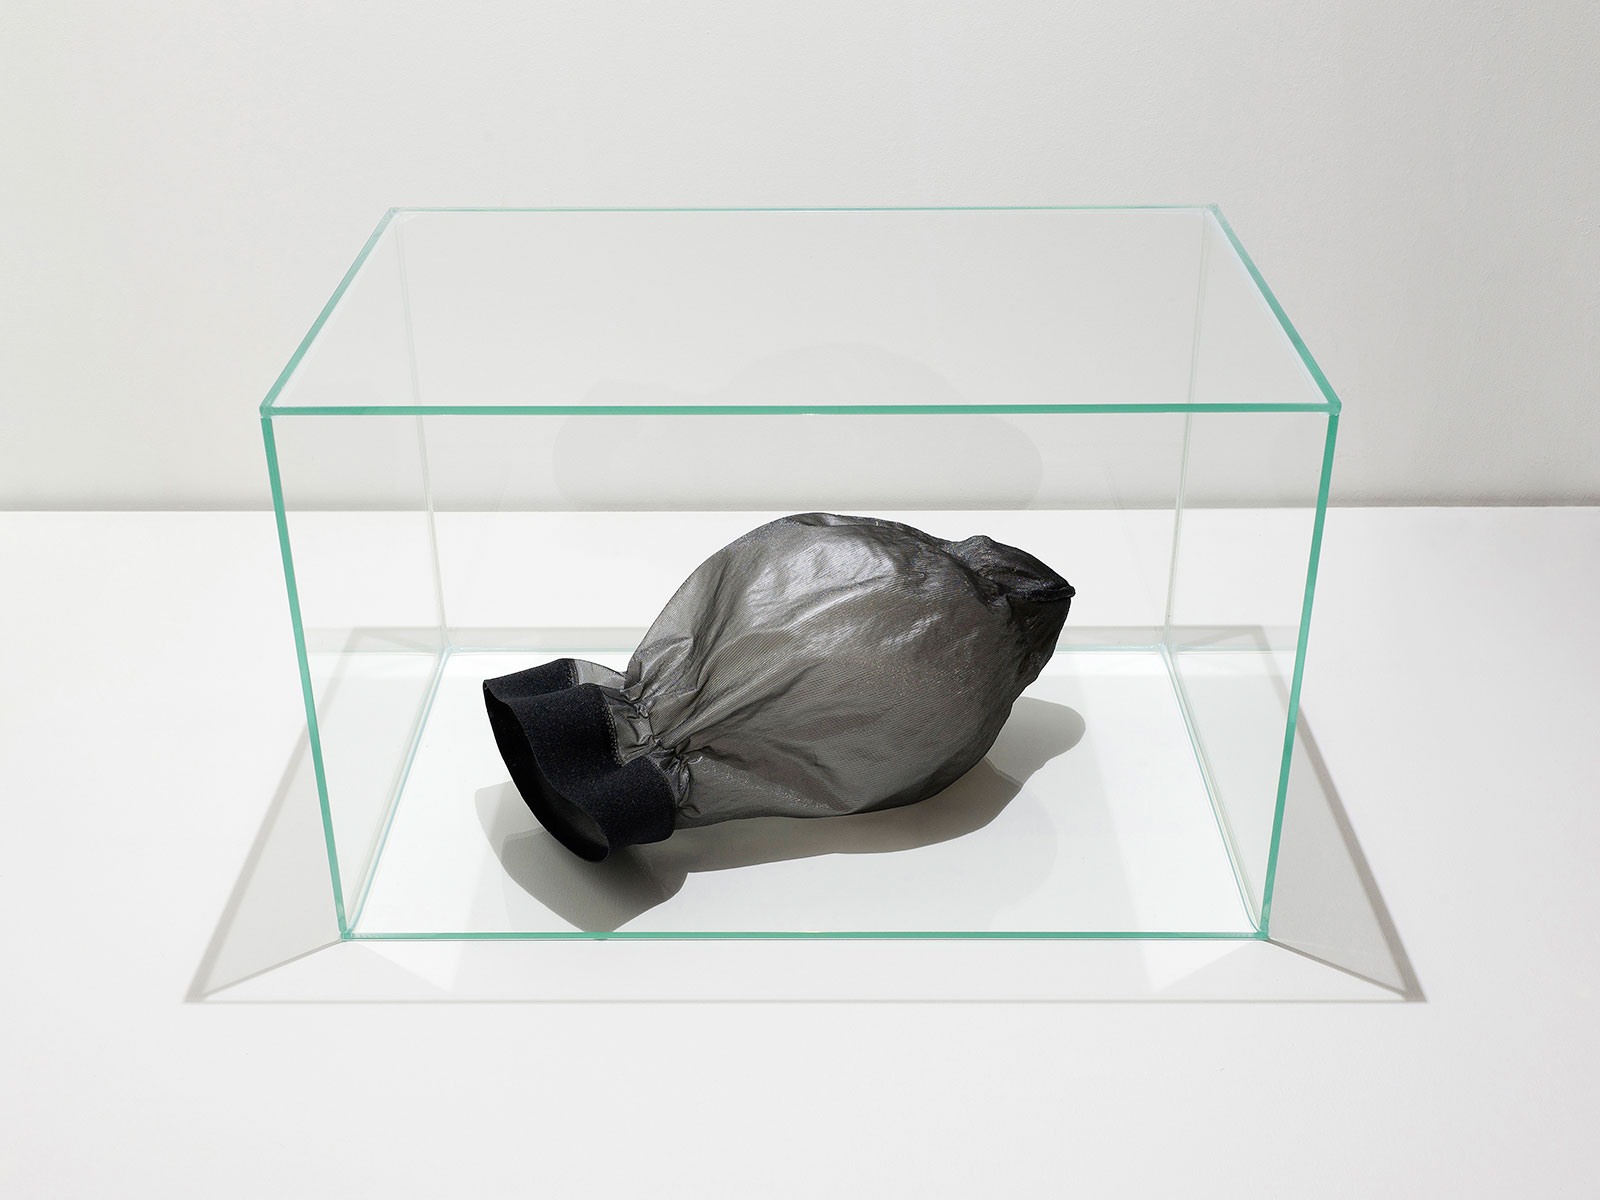 Black polyamide sock with collapsed balloon and epoxy resin, placed in a glass cube